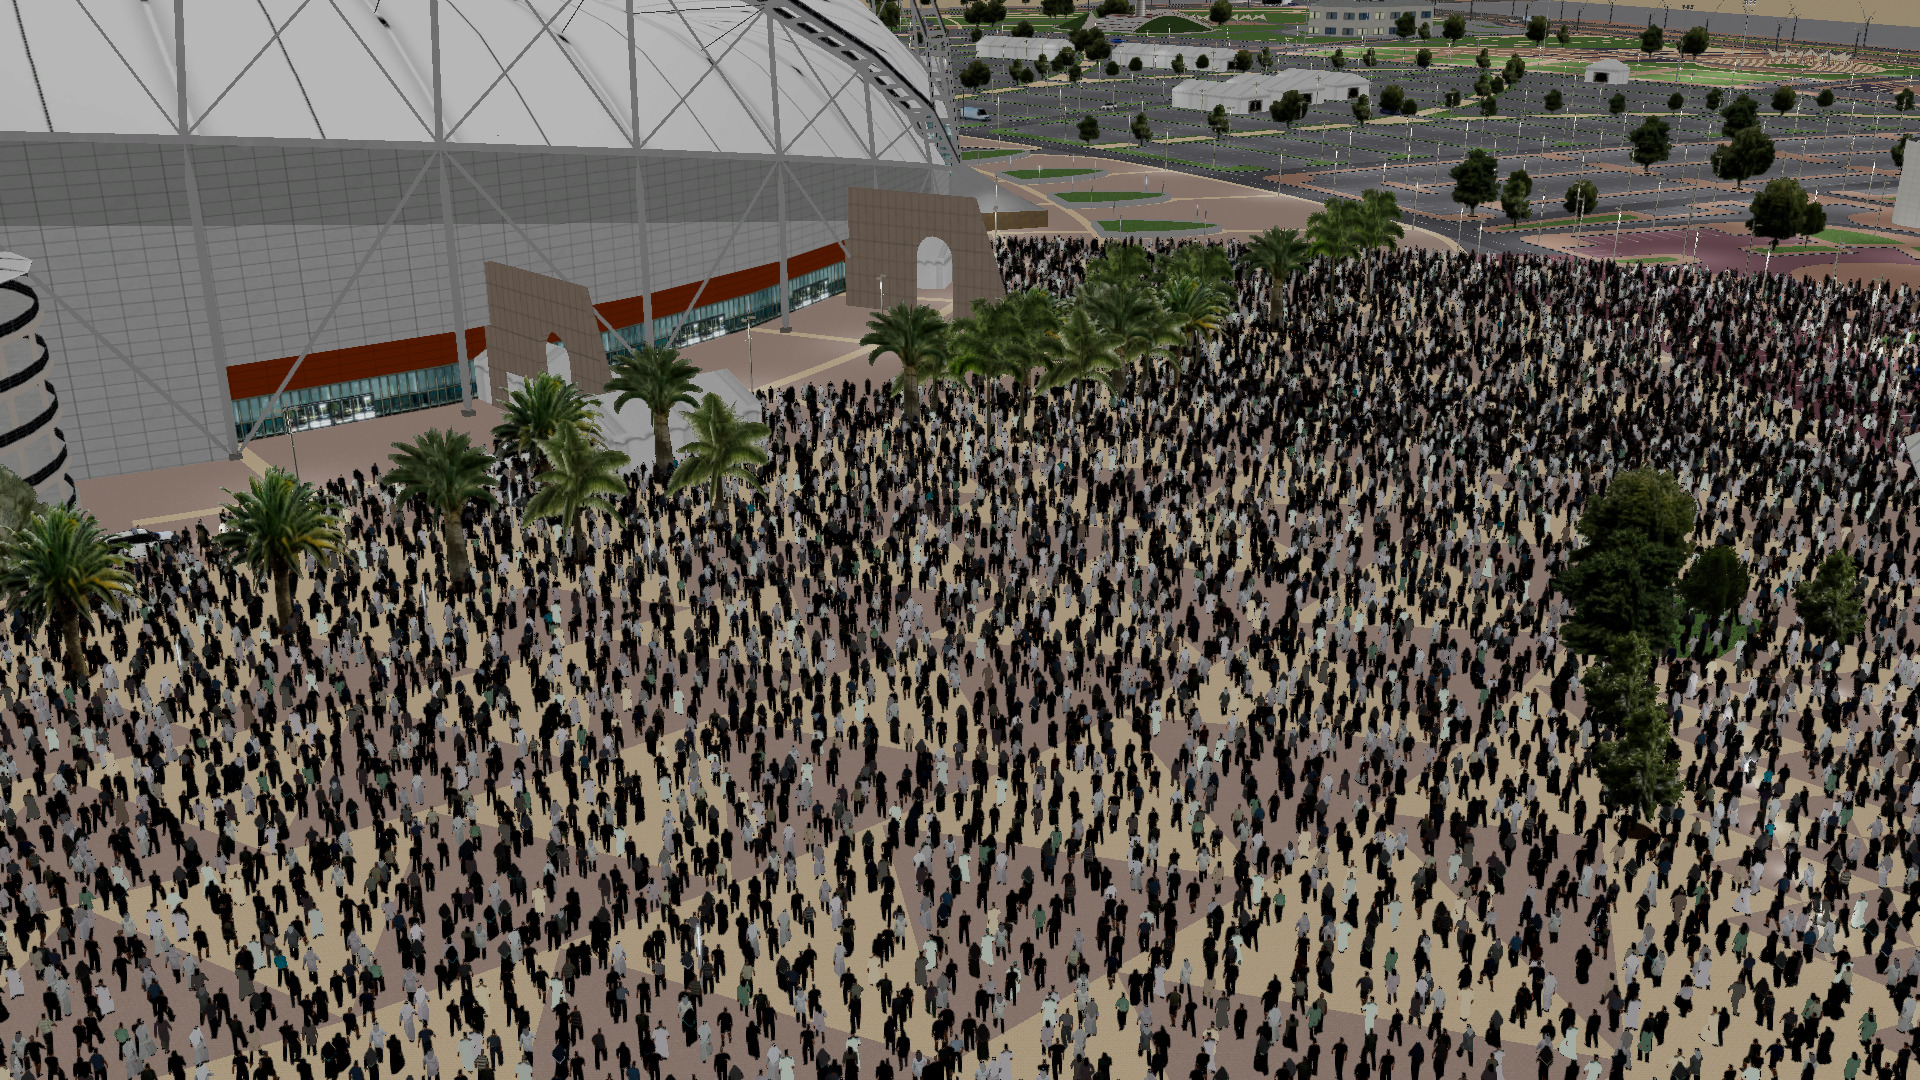 Large crowds are moving outside a sporting stadium, observed by a police drone in the ADMS Flight Training Simulator.